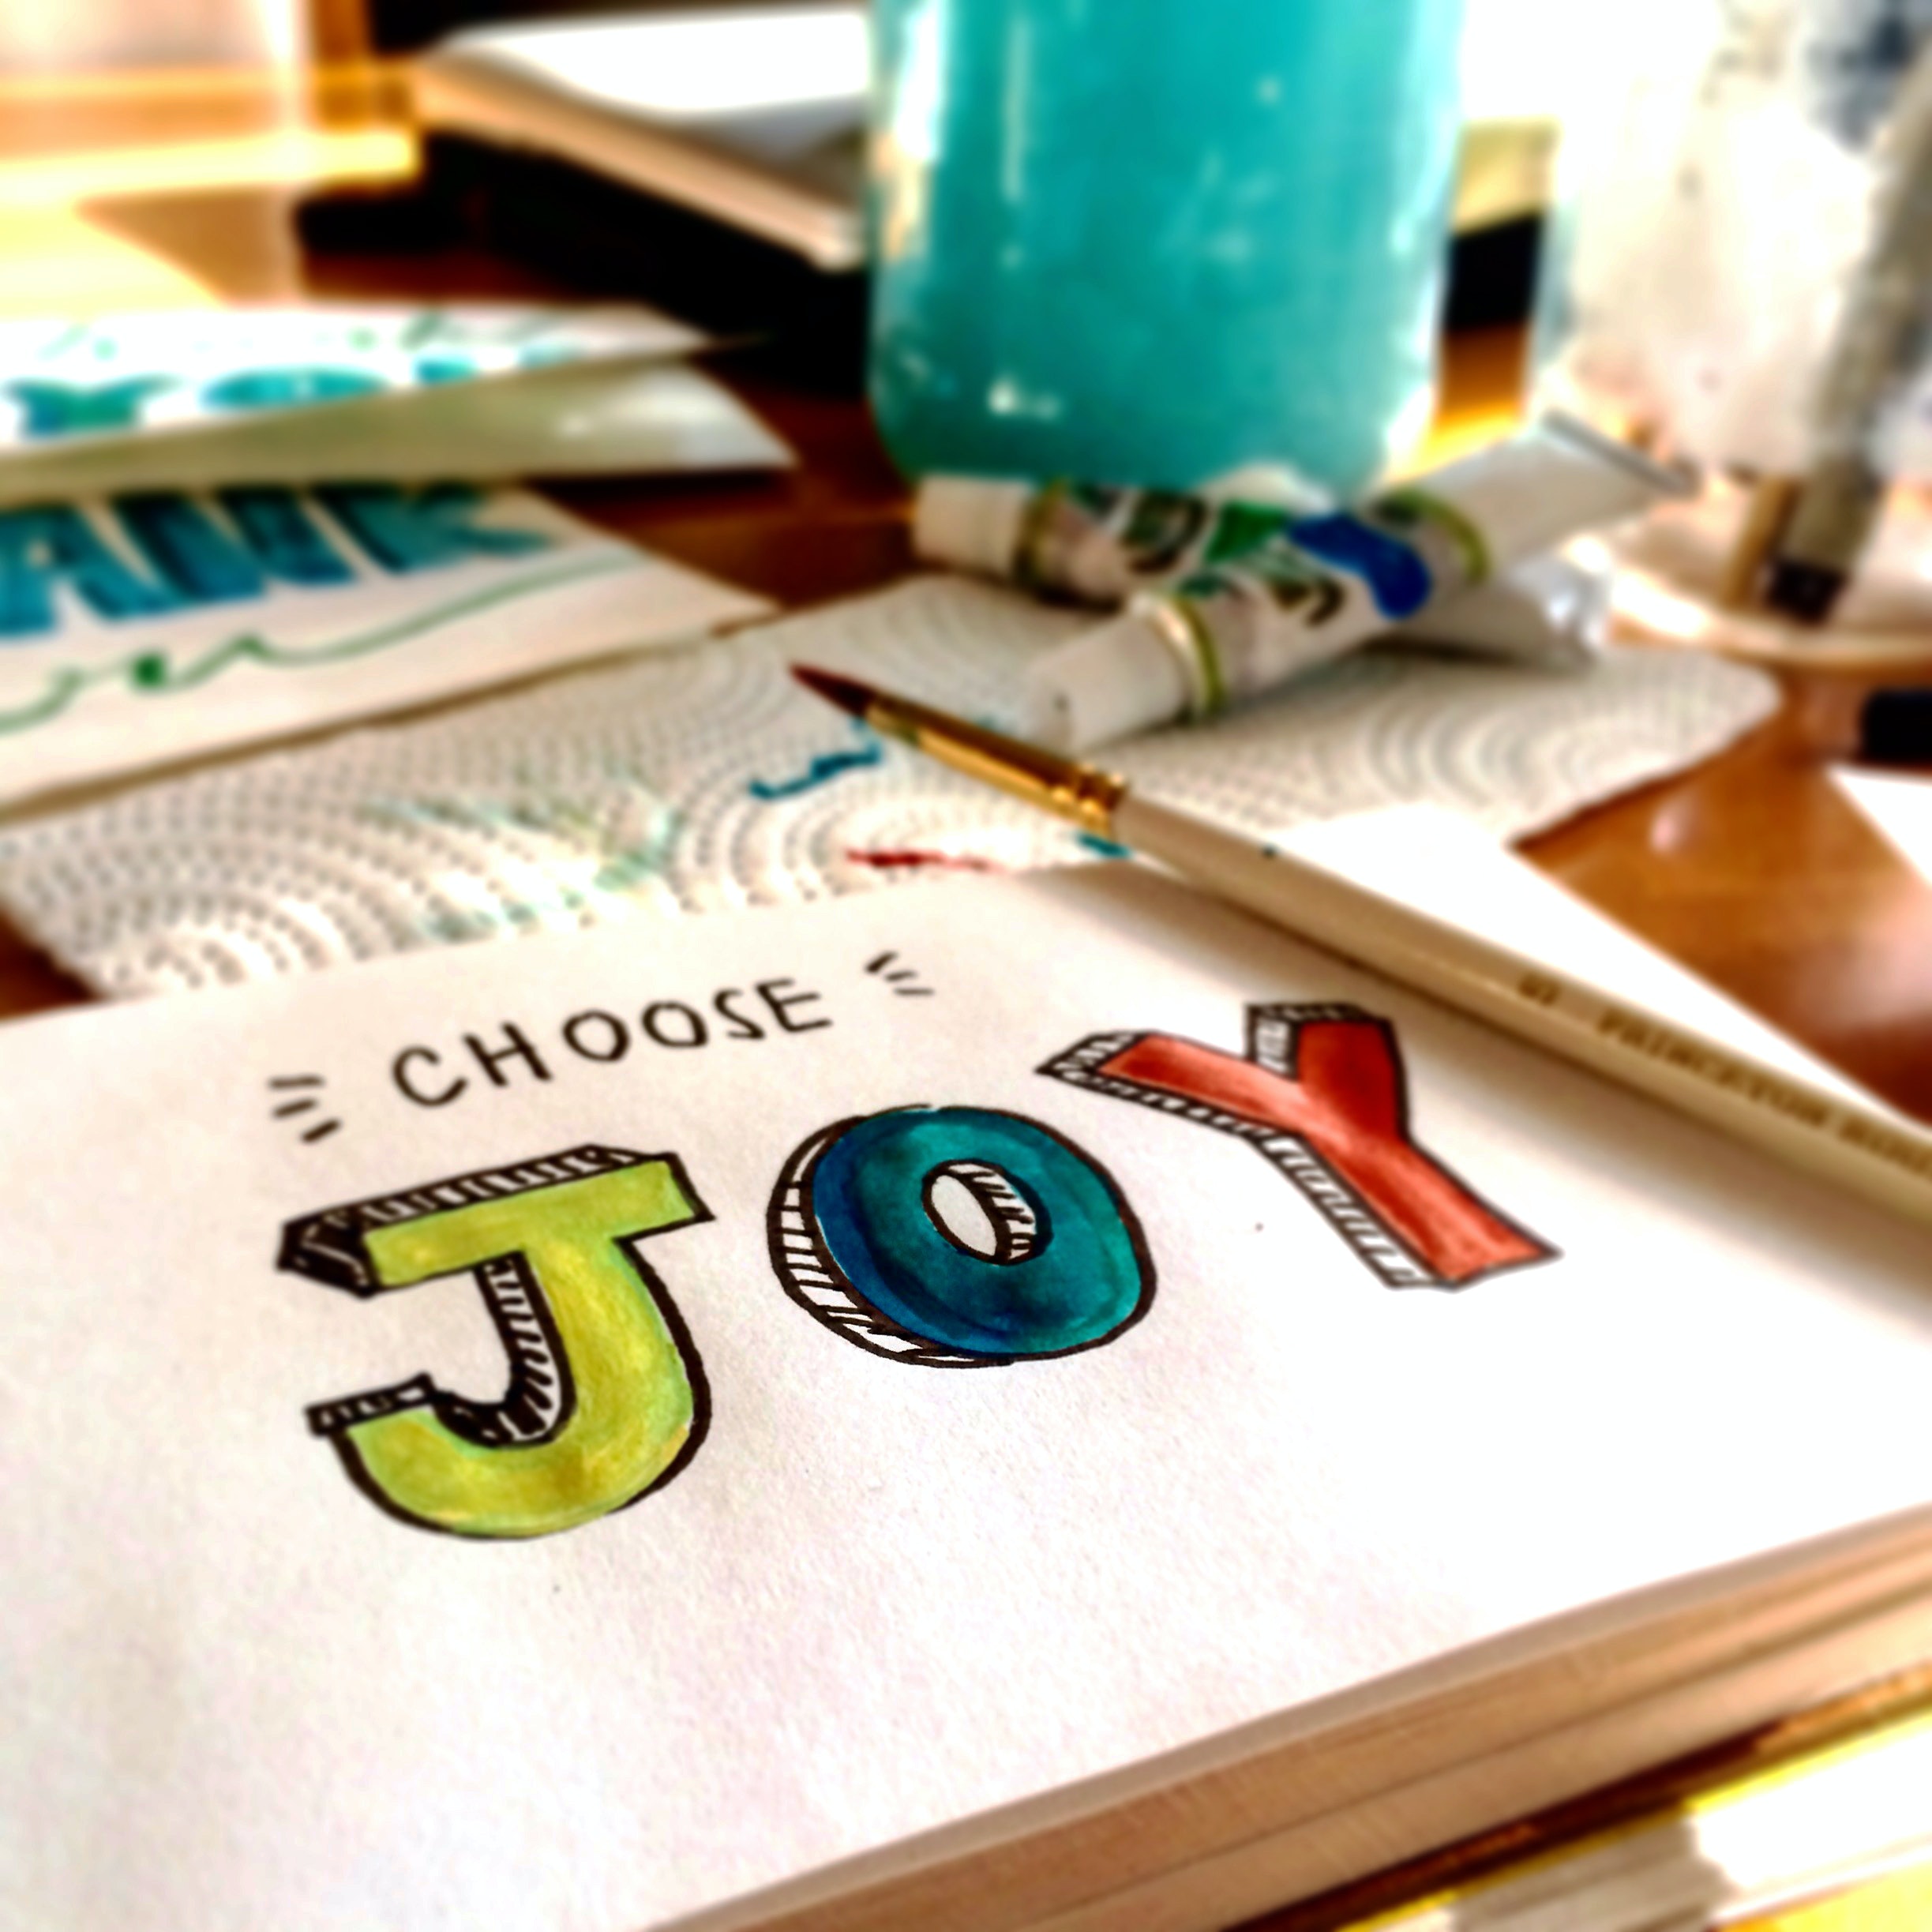 White paper with “choose joy” painted on it. The paper is surrounded by art supplies.